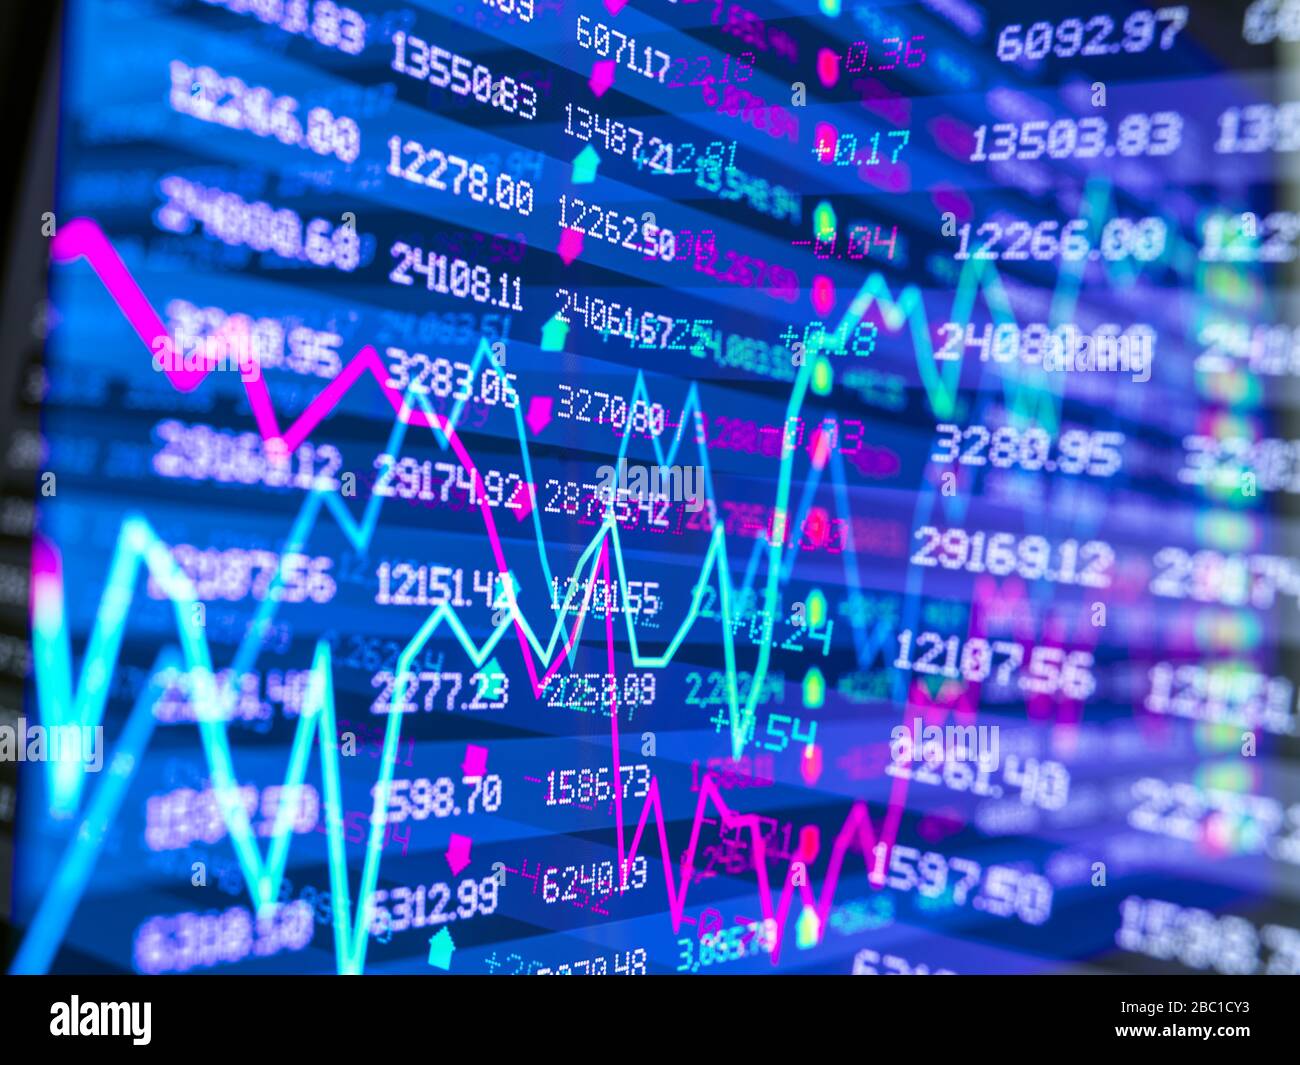 Digital composite of two stock market data displays Stock Photo